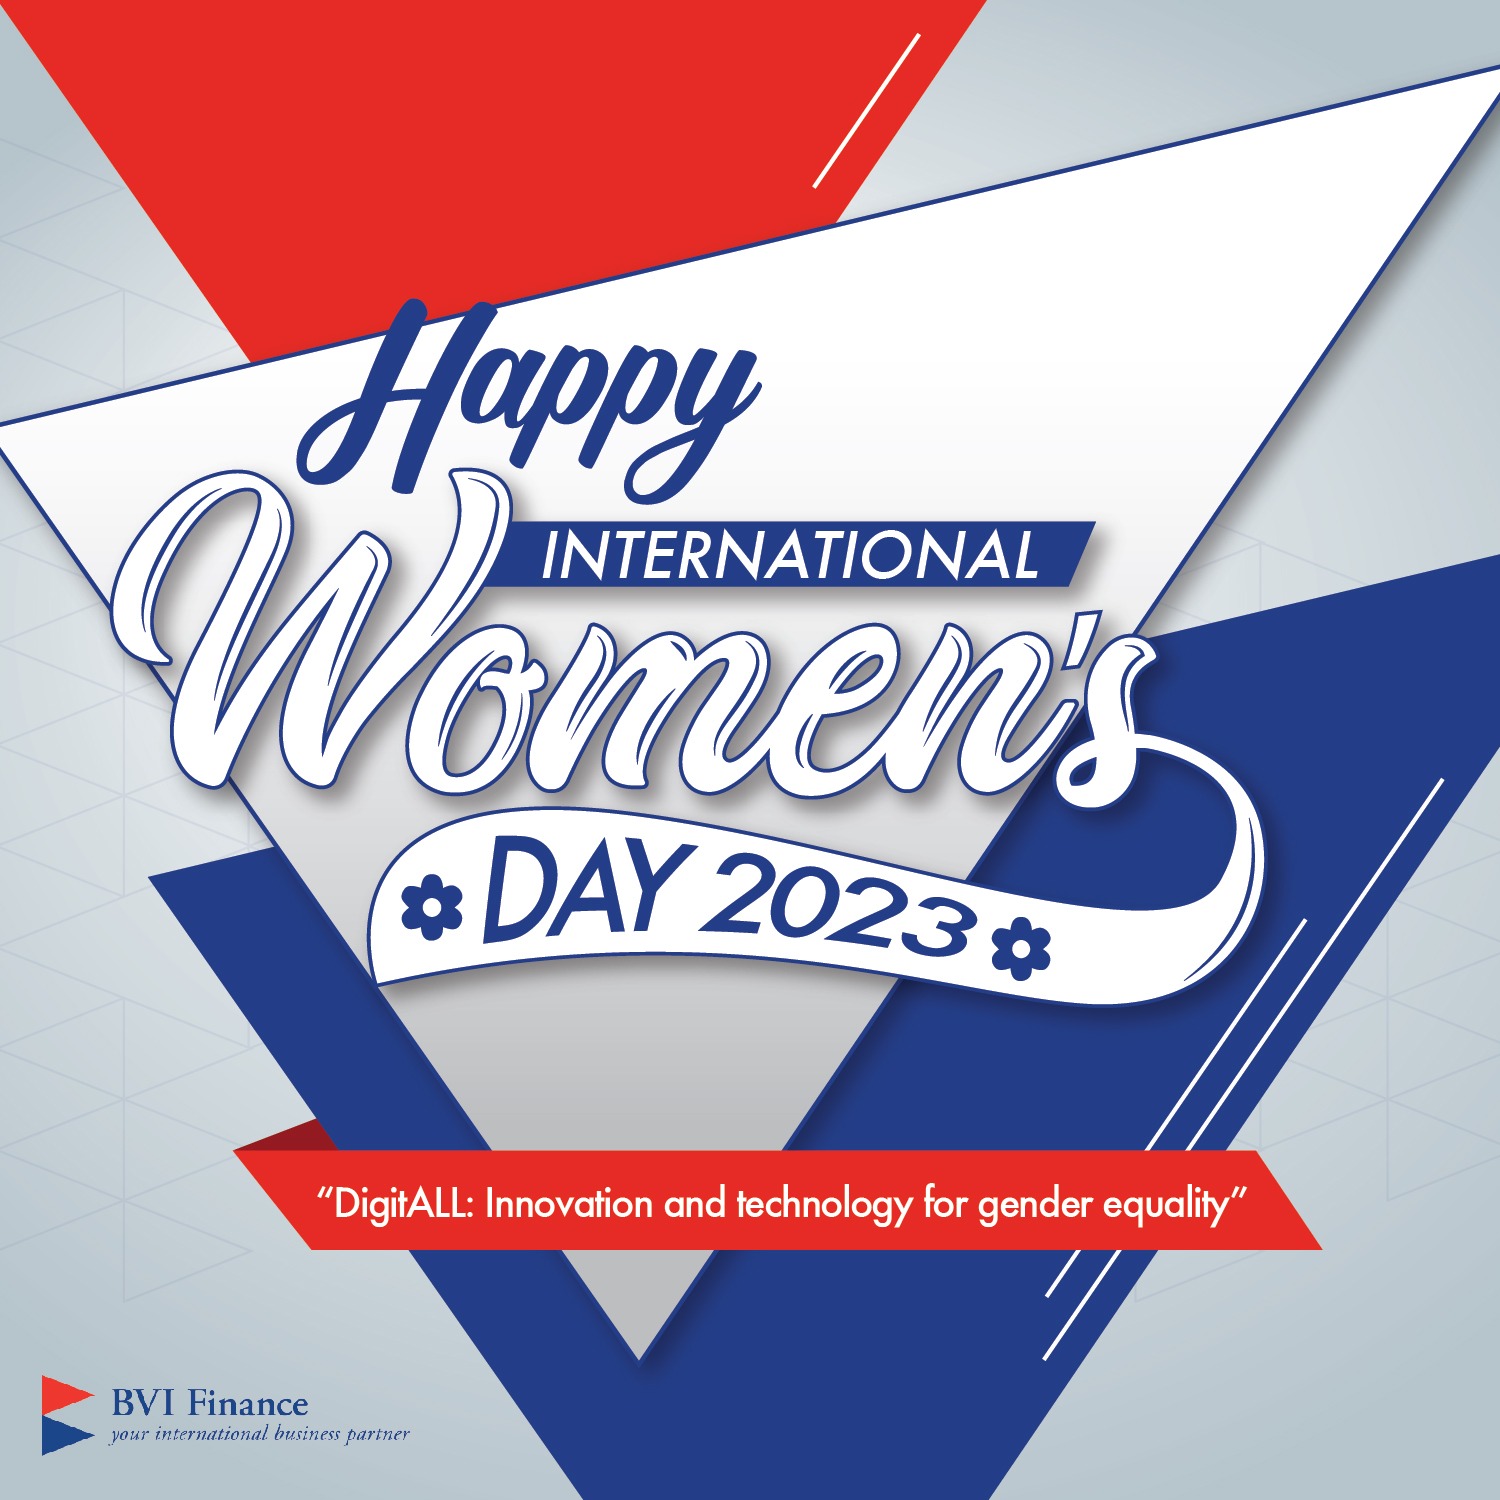 REVA DAULO AND JULIA SHAMINI CHASE SELECTED AS LEADING WOMEN IN TECH BY THE BVI FINANCIAL SERVICES INDUSTRY FOR INTERNATIONAL WOMEN’S DAY 2023